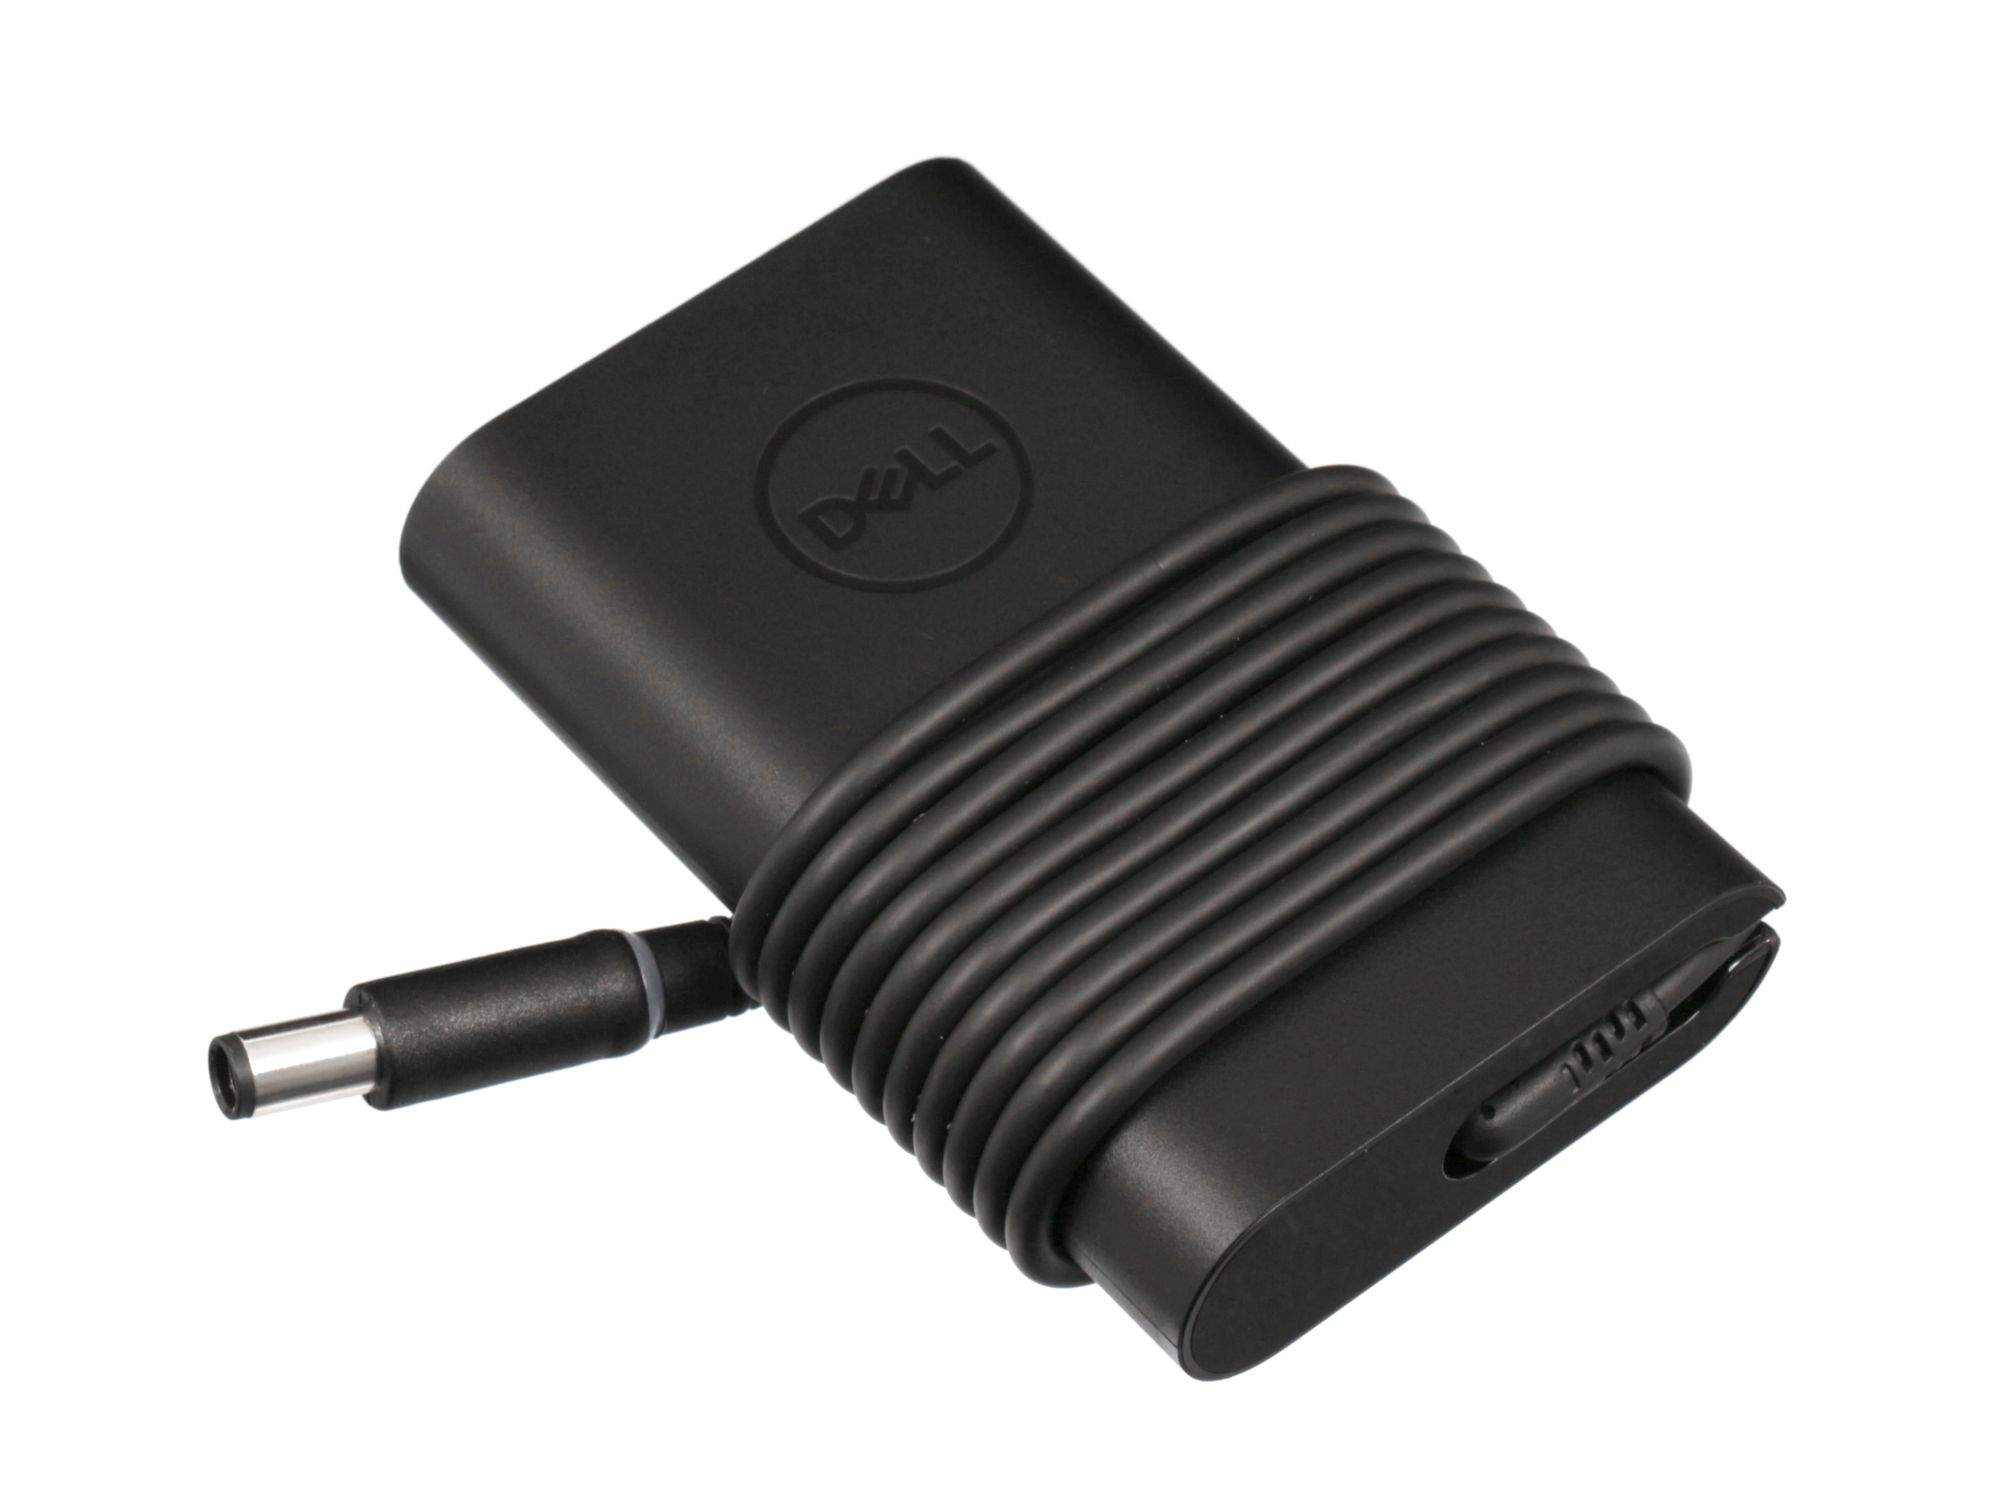 DELL AC Adapter 65W 3 Prong w/EU Power Cord (0G4X7T)